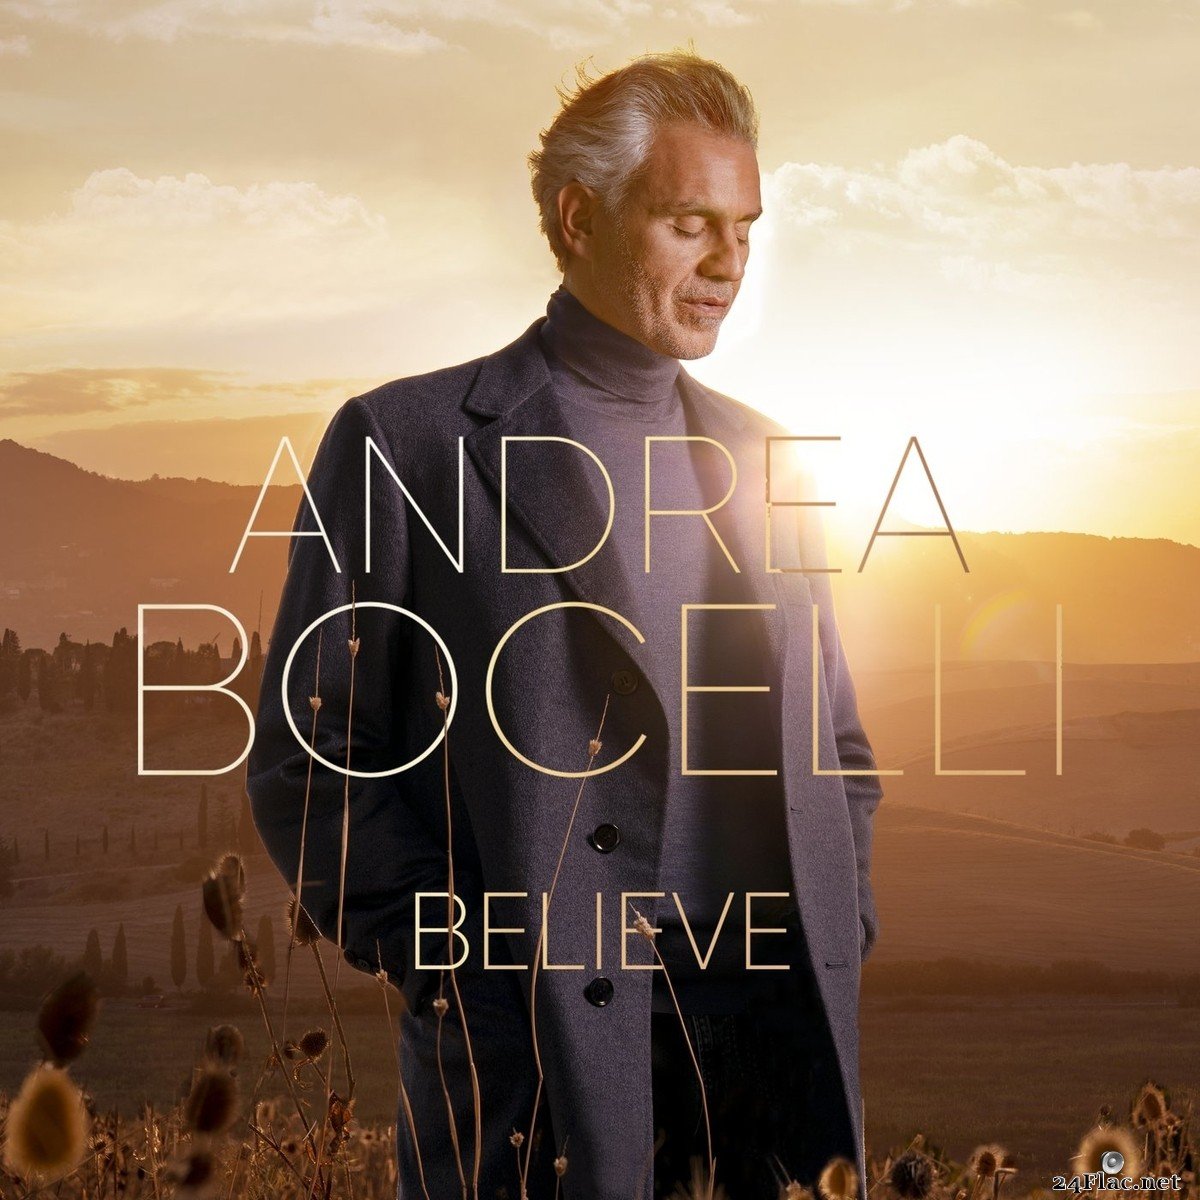 Andrea Bocelli - Believe (Deluxe Extended) (2021) FLAC